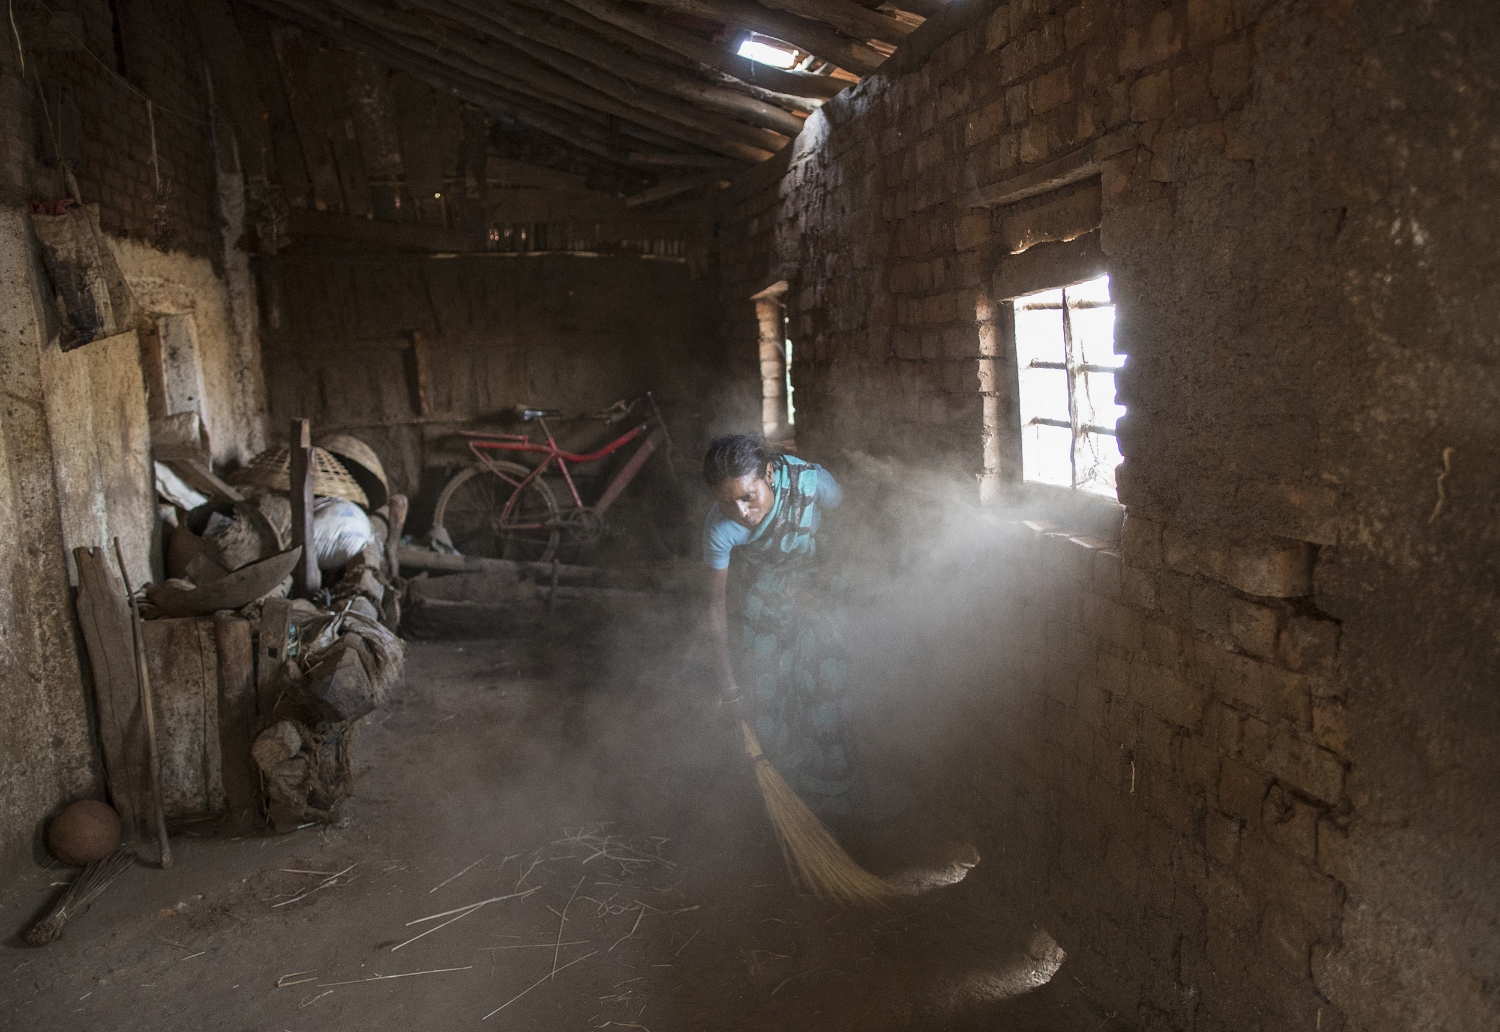  Shivarti, second wife of Namdeo, cleans a room inside their house in Denganmal village. 